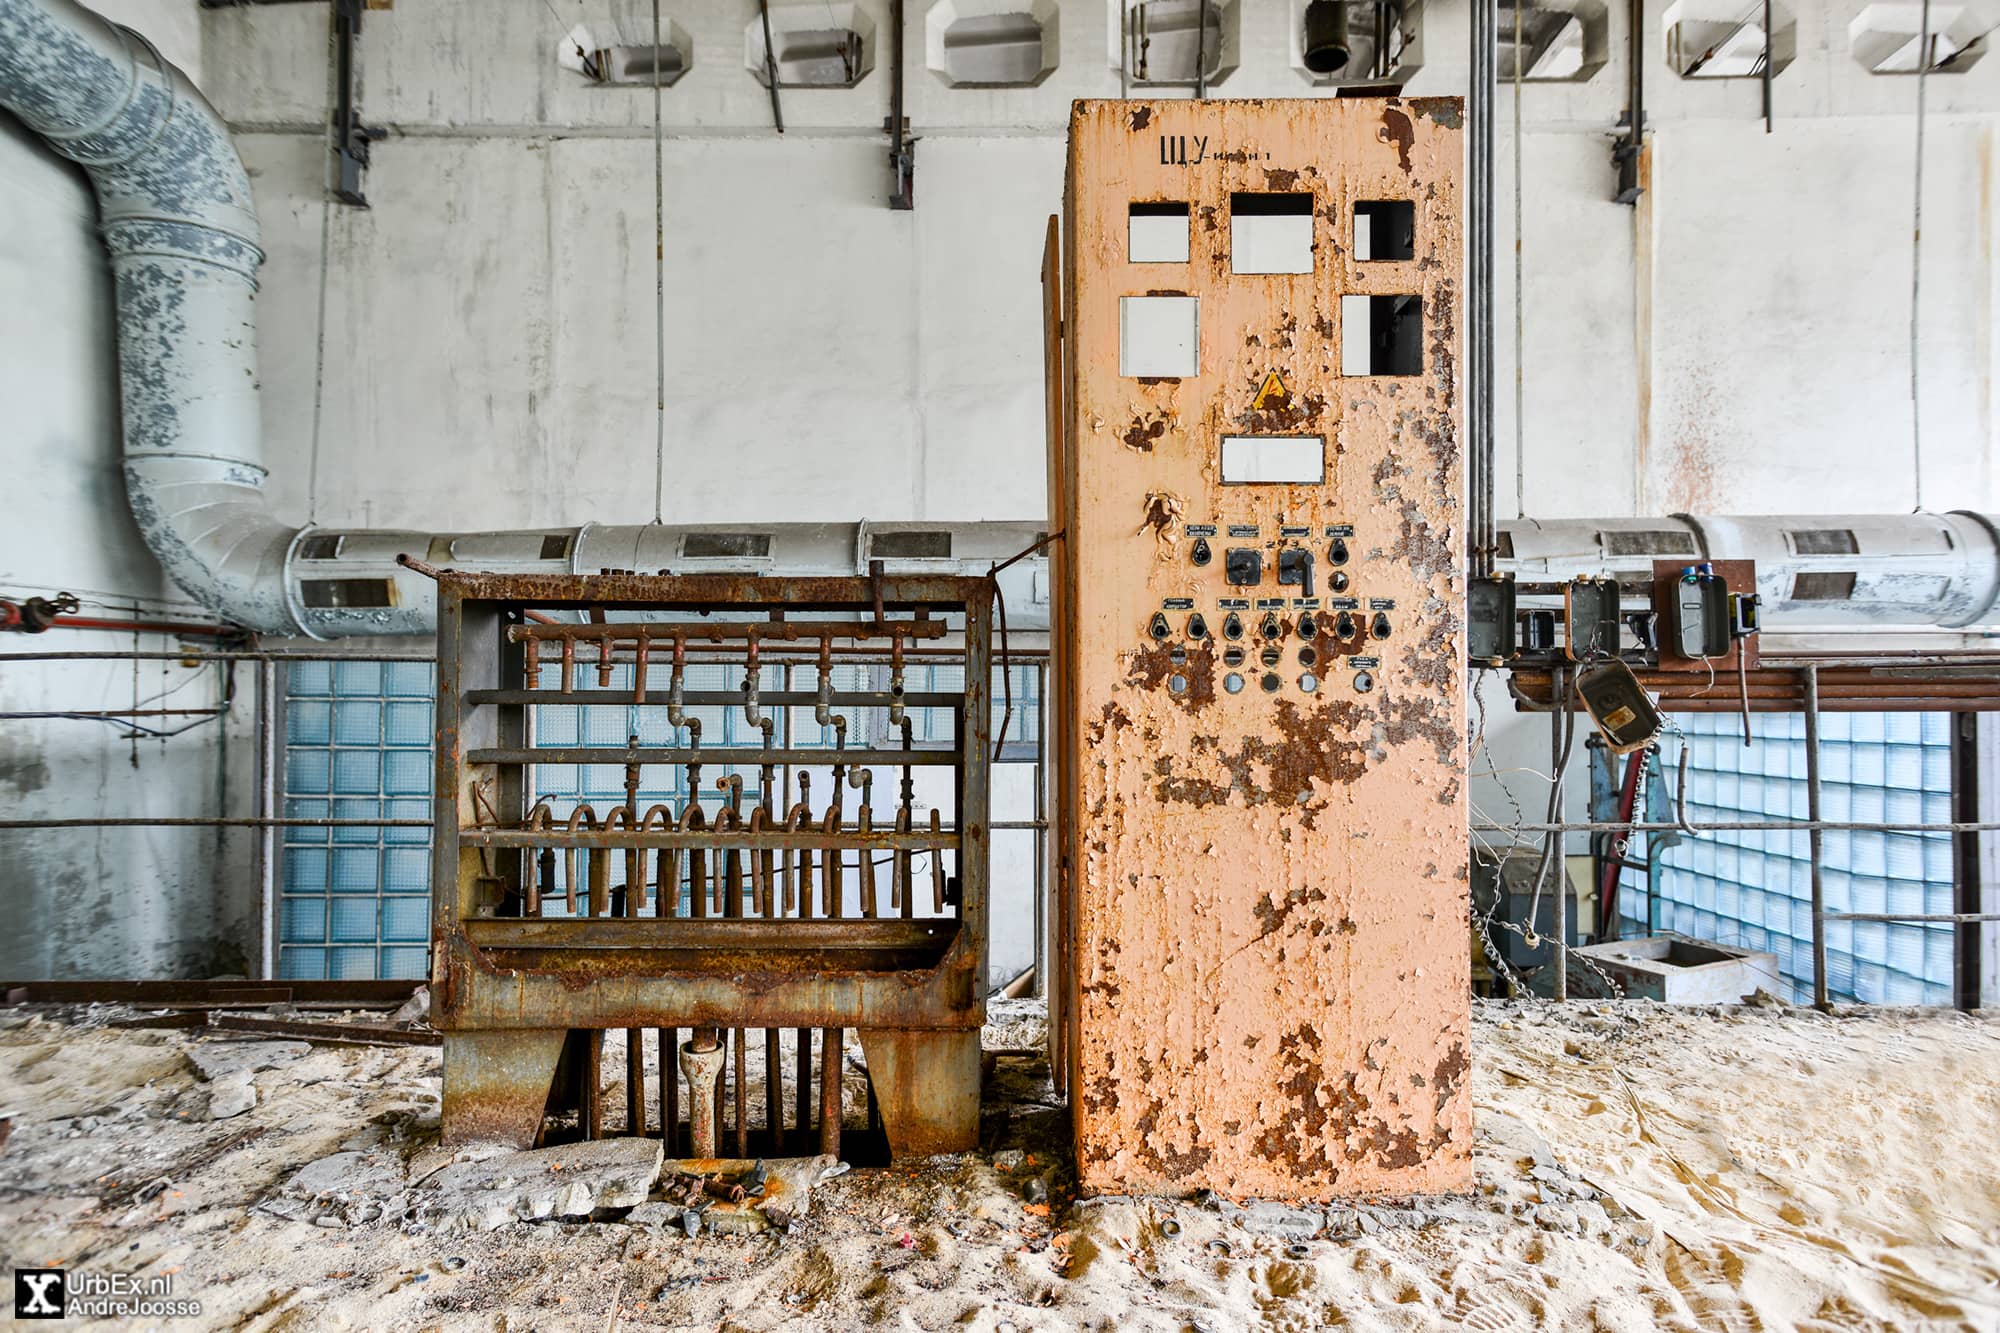 Factory Chernobyl 35 years later